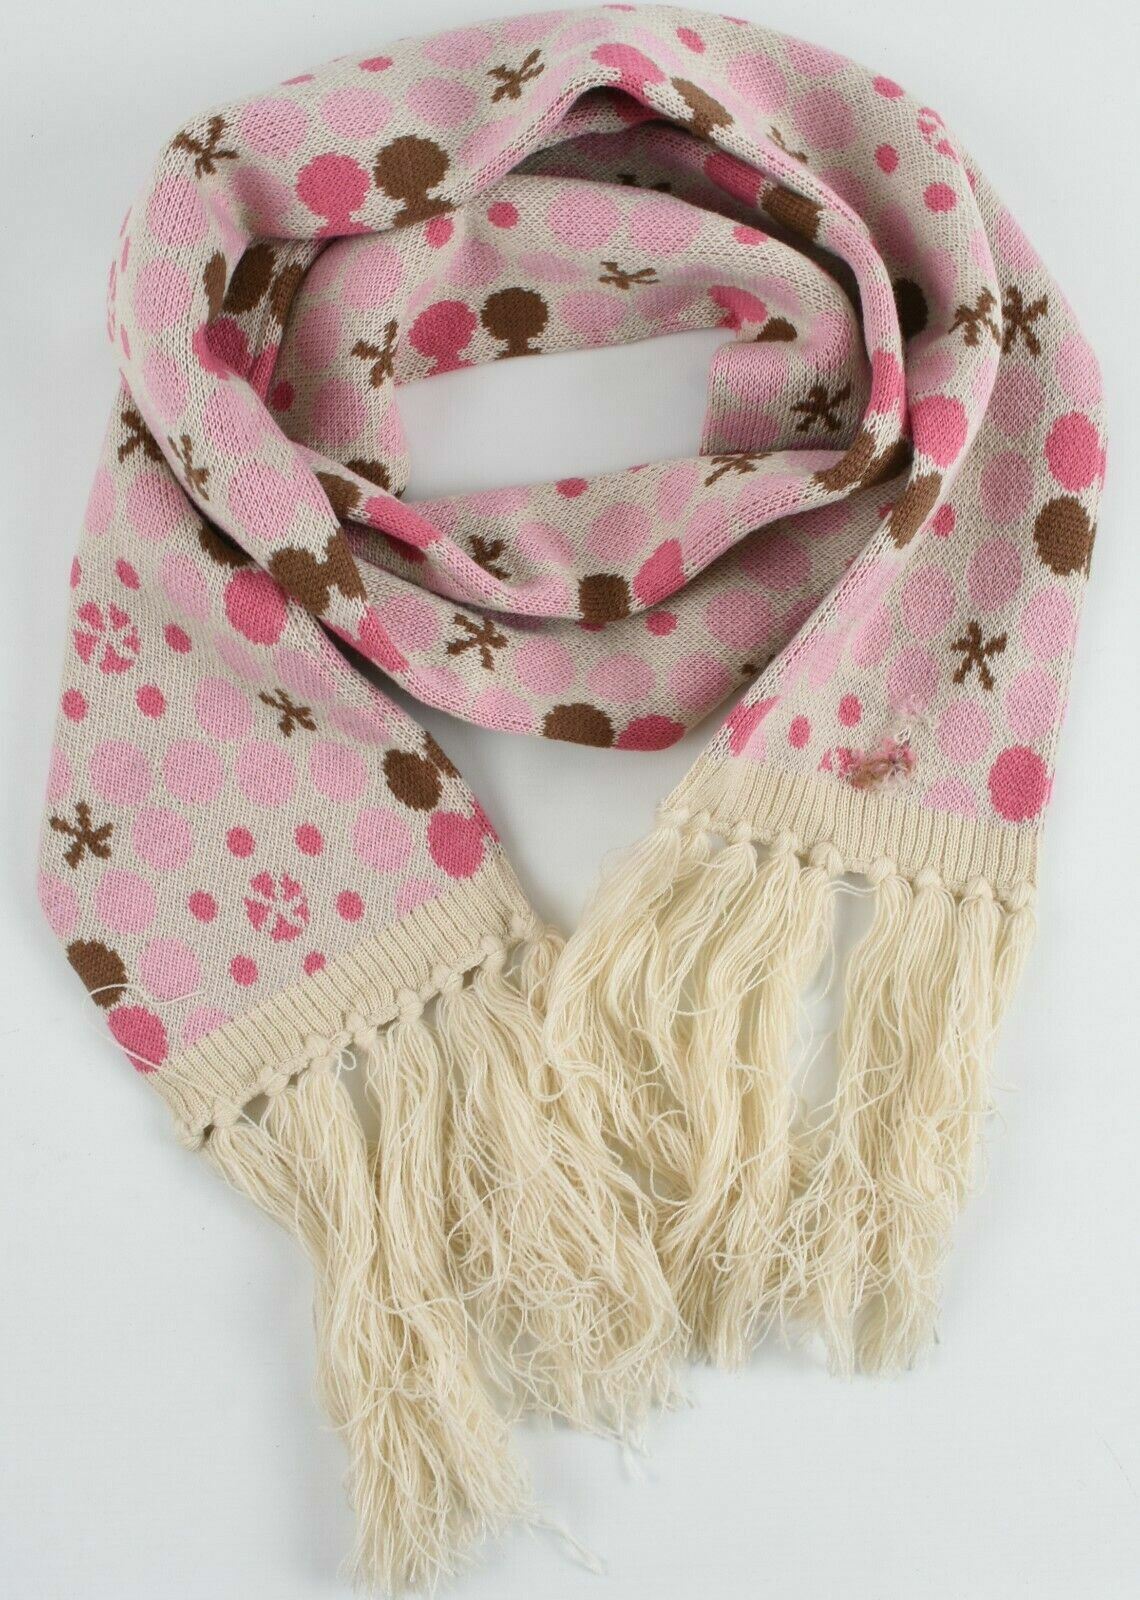 ANIMAL Women's LIBBY Soft Knit Scarf with Tassels, Pink/Multicoloured